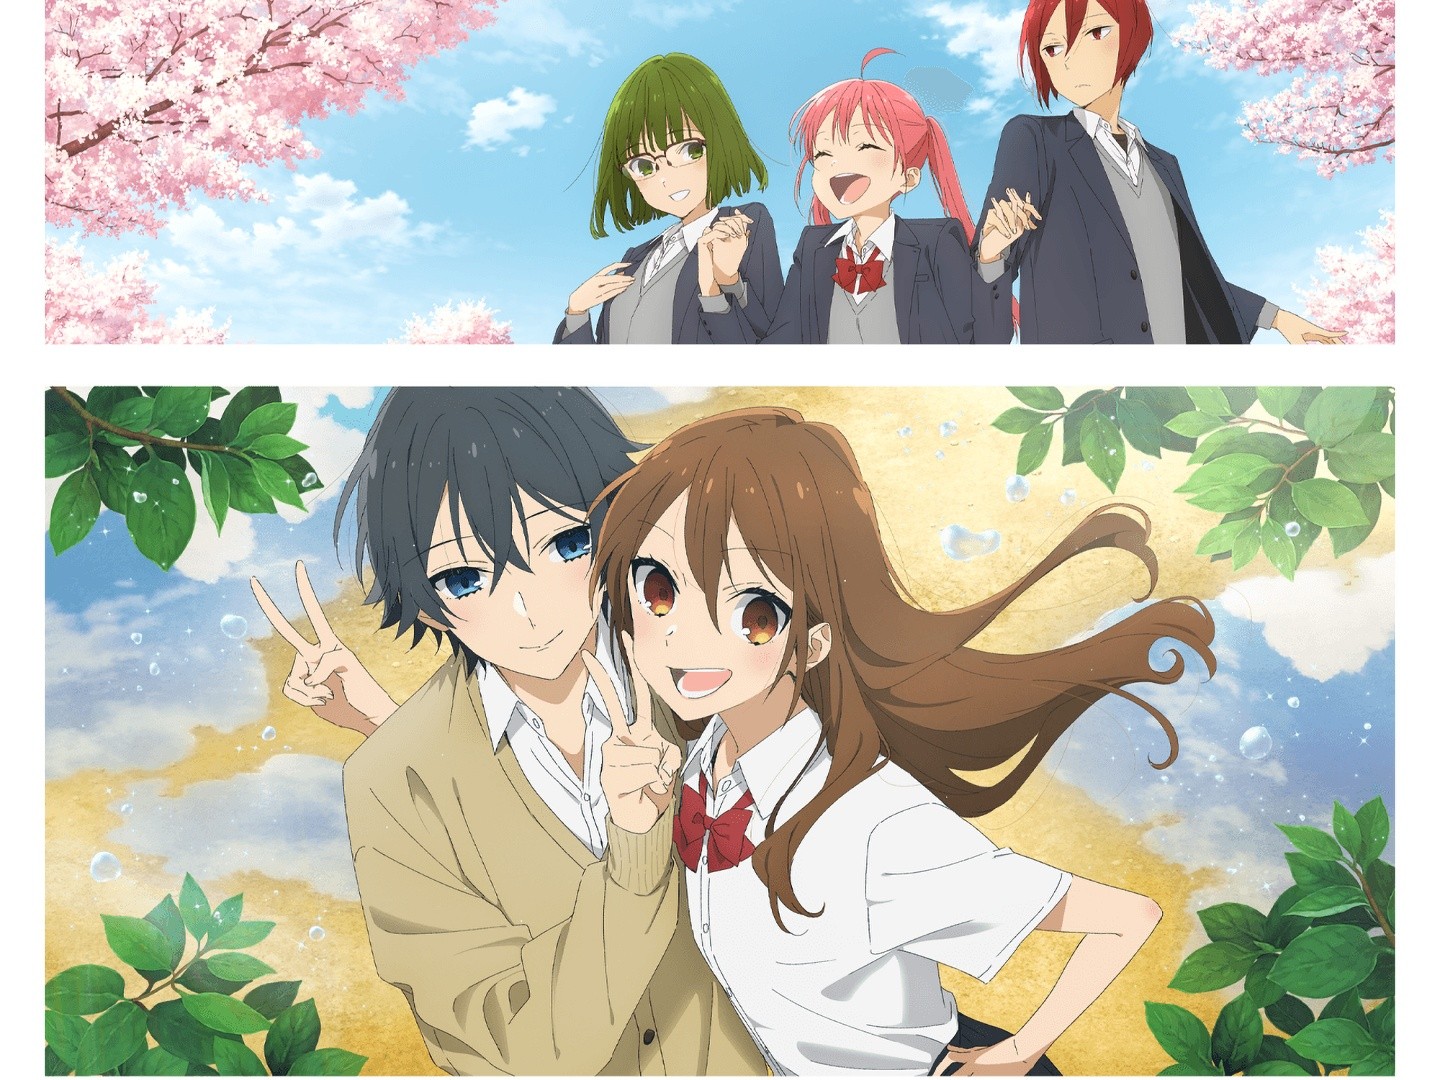 Horimiya: The Missing Pieces Shares Final Trailer Ahead of Debut